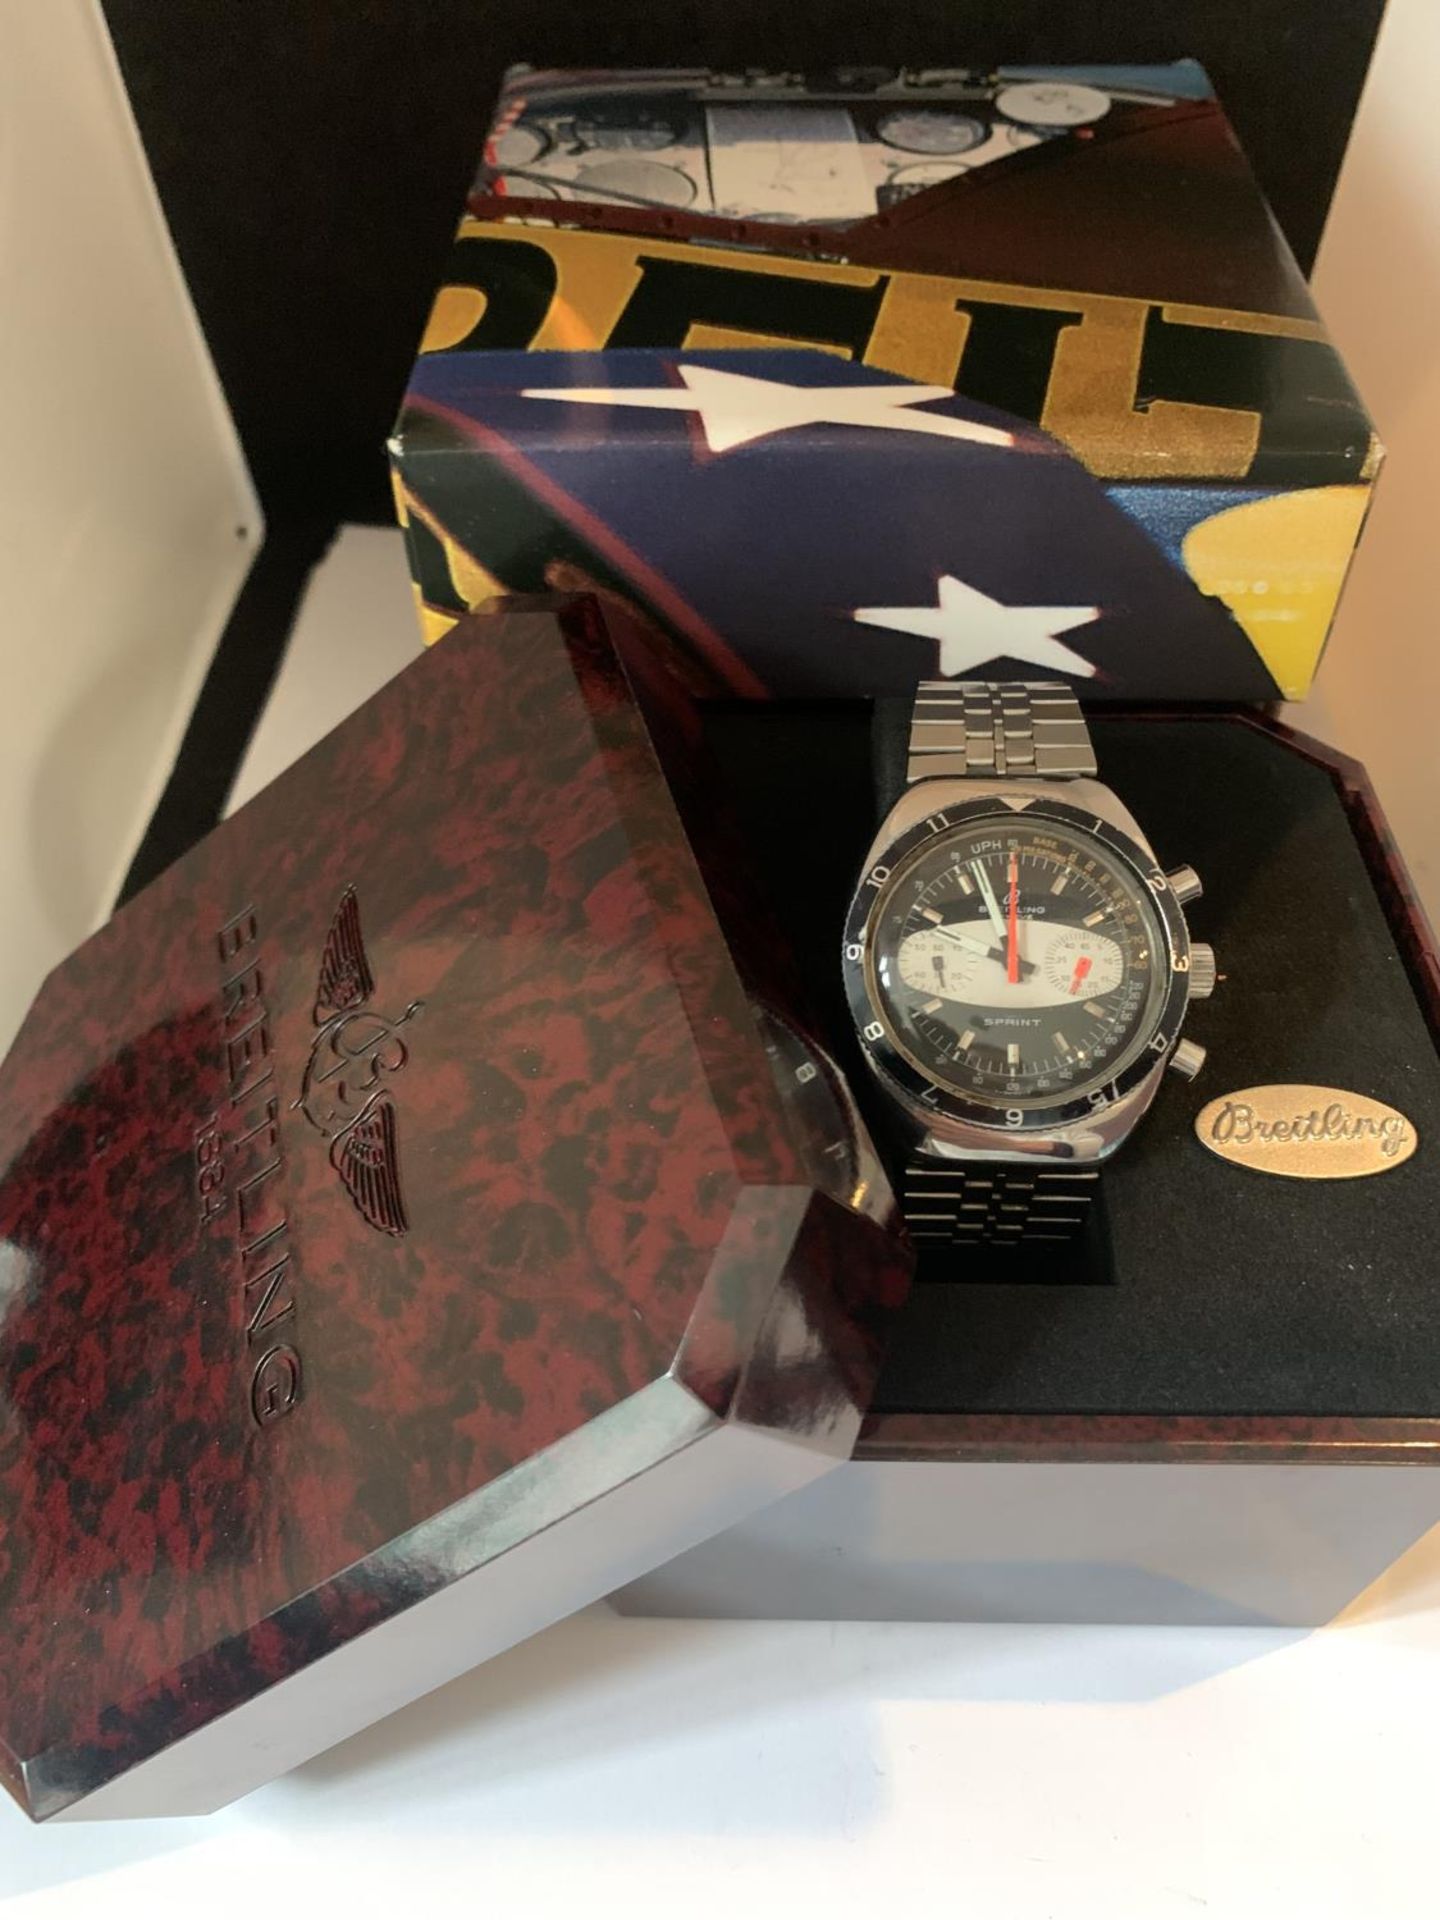 A BREITLING SPRINT CHRONOGRAPH SURFBOARD WATCH WITH BOX